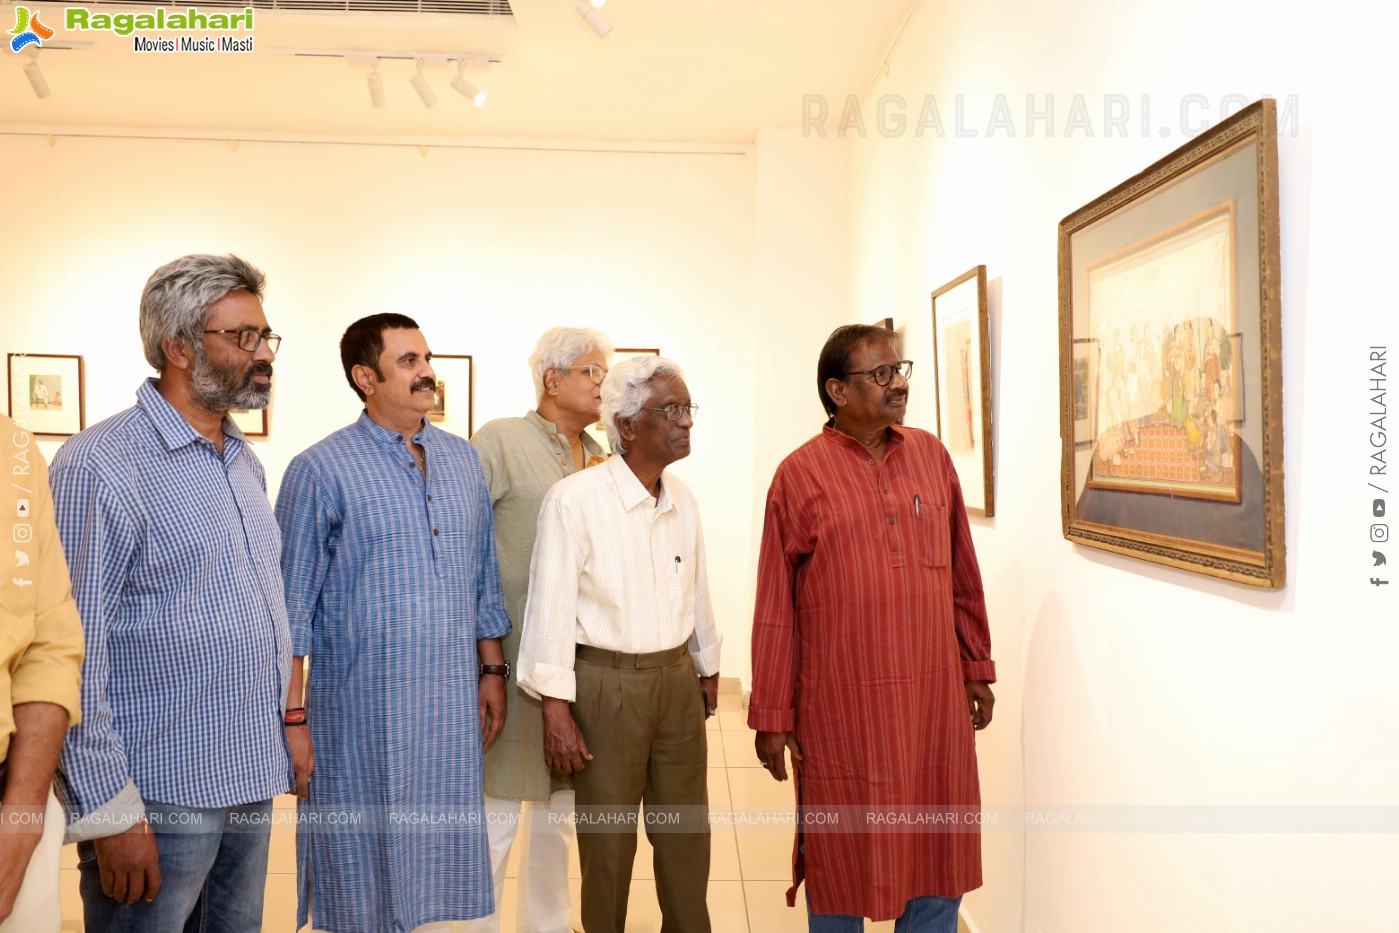 Inauguration of Hindustan Files Art Gallery at Chitramayee State Gallery of Art